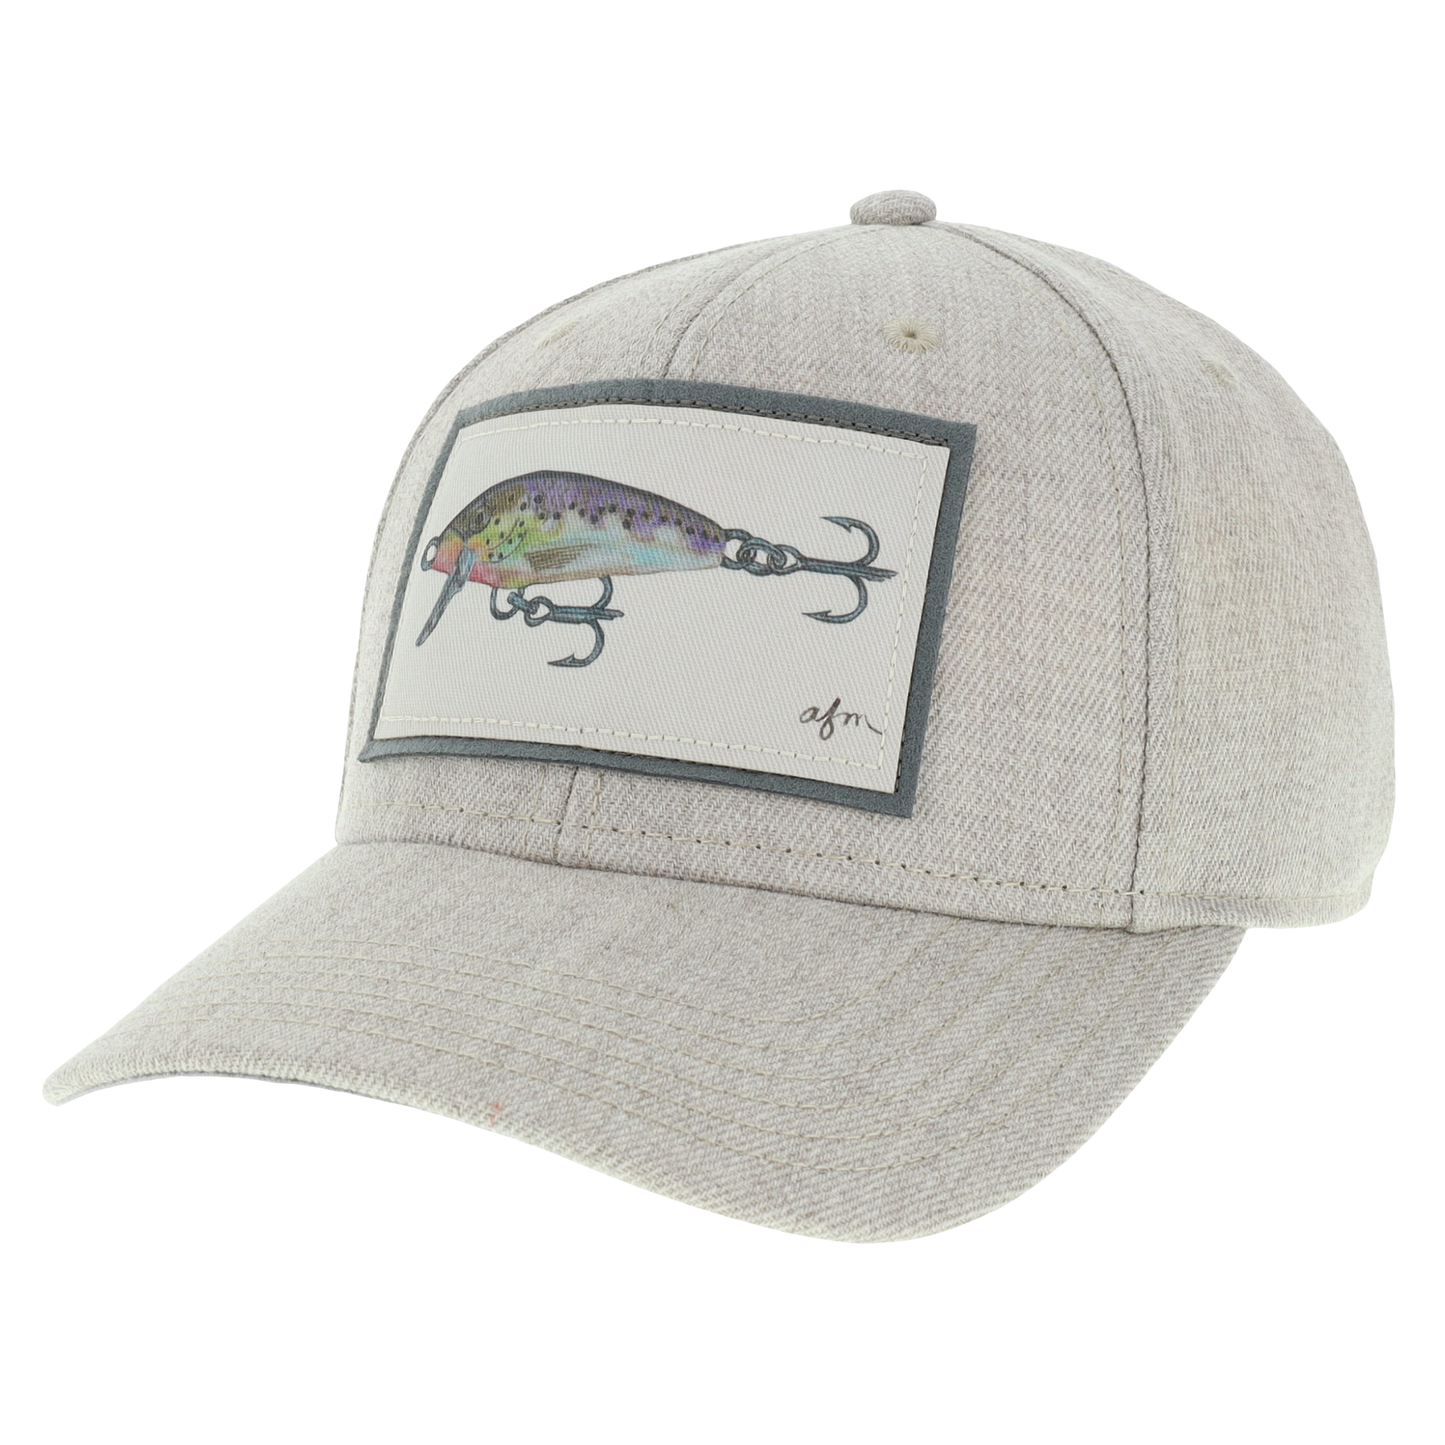 Minnow Lure Mid-Pro Hat in Heather Light Grey